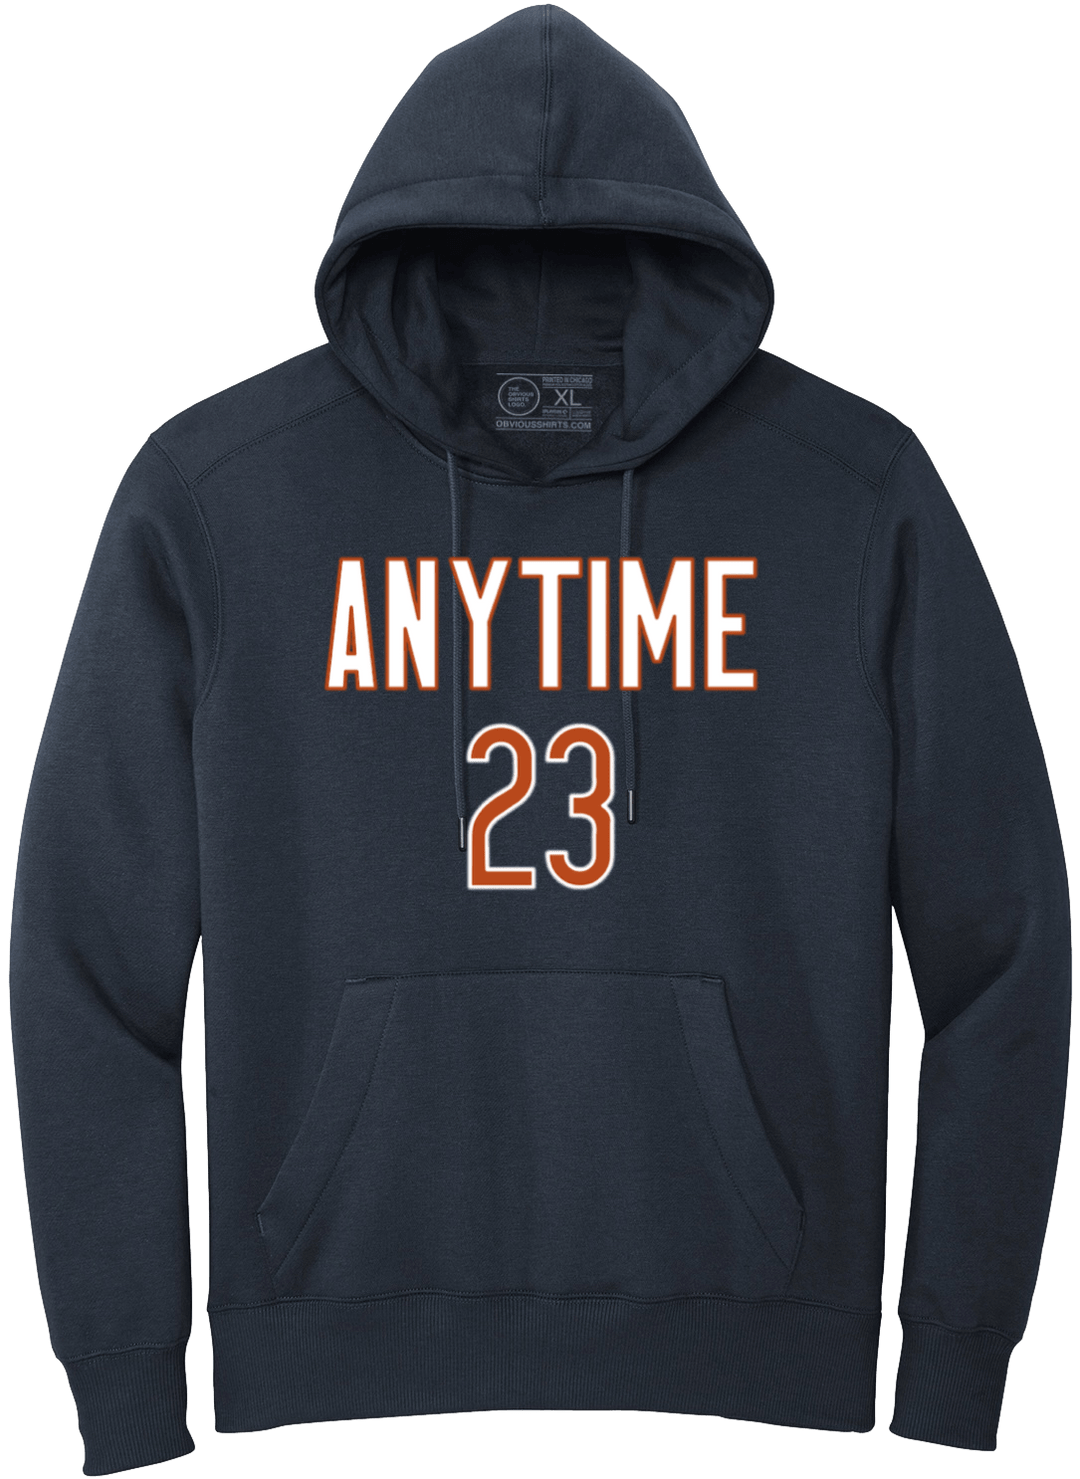 ANYTIME 23 (HOODED SWEATSHIRT) - OBVIOUS SHIRTS